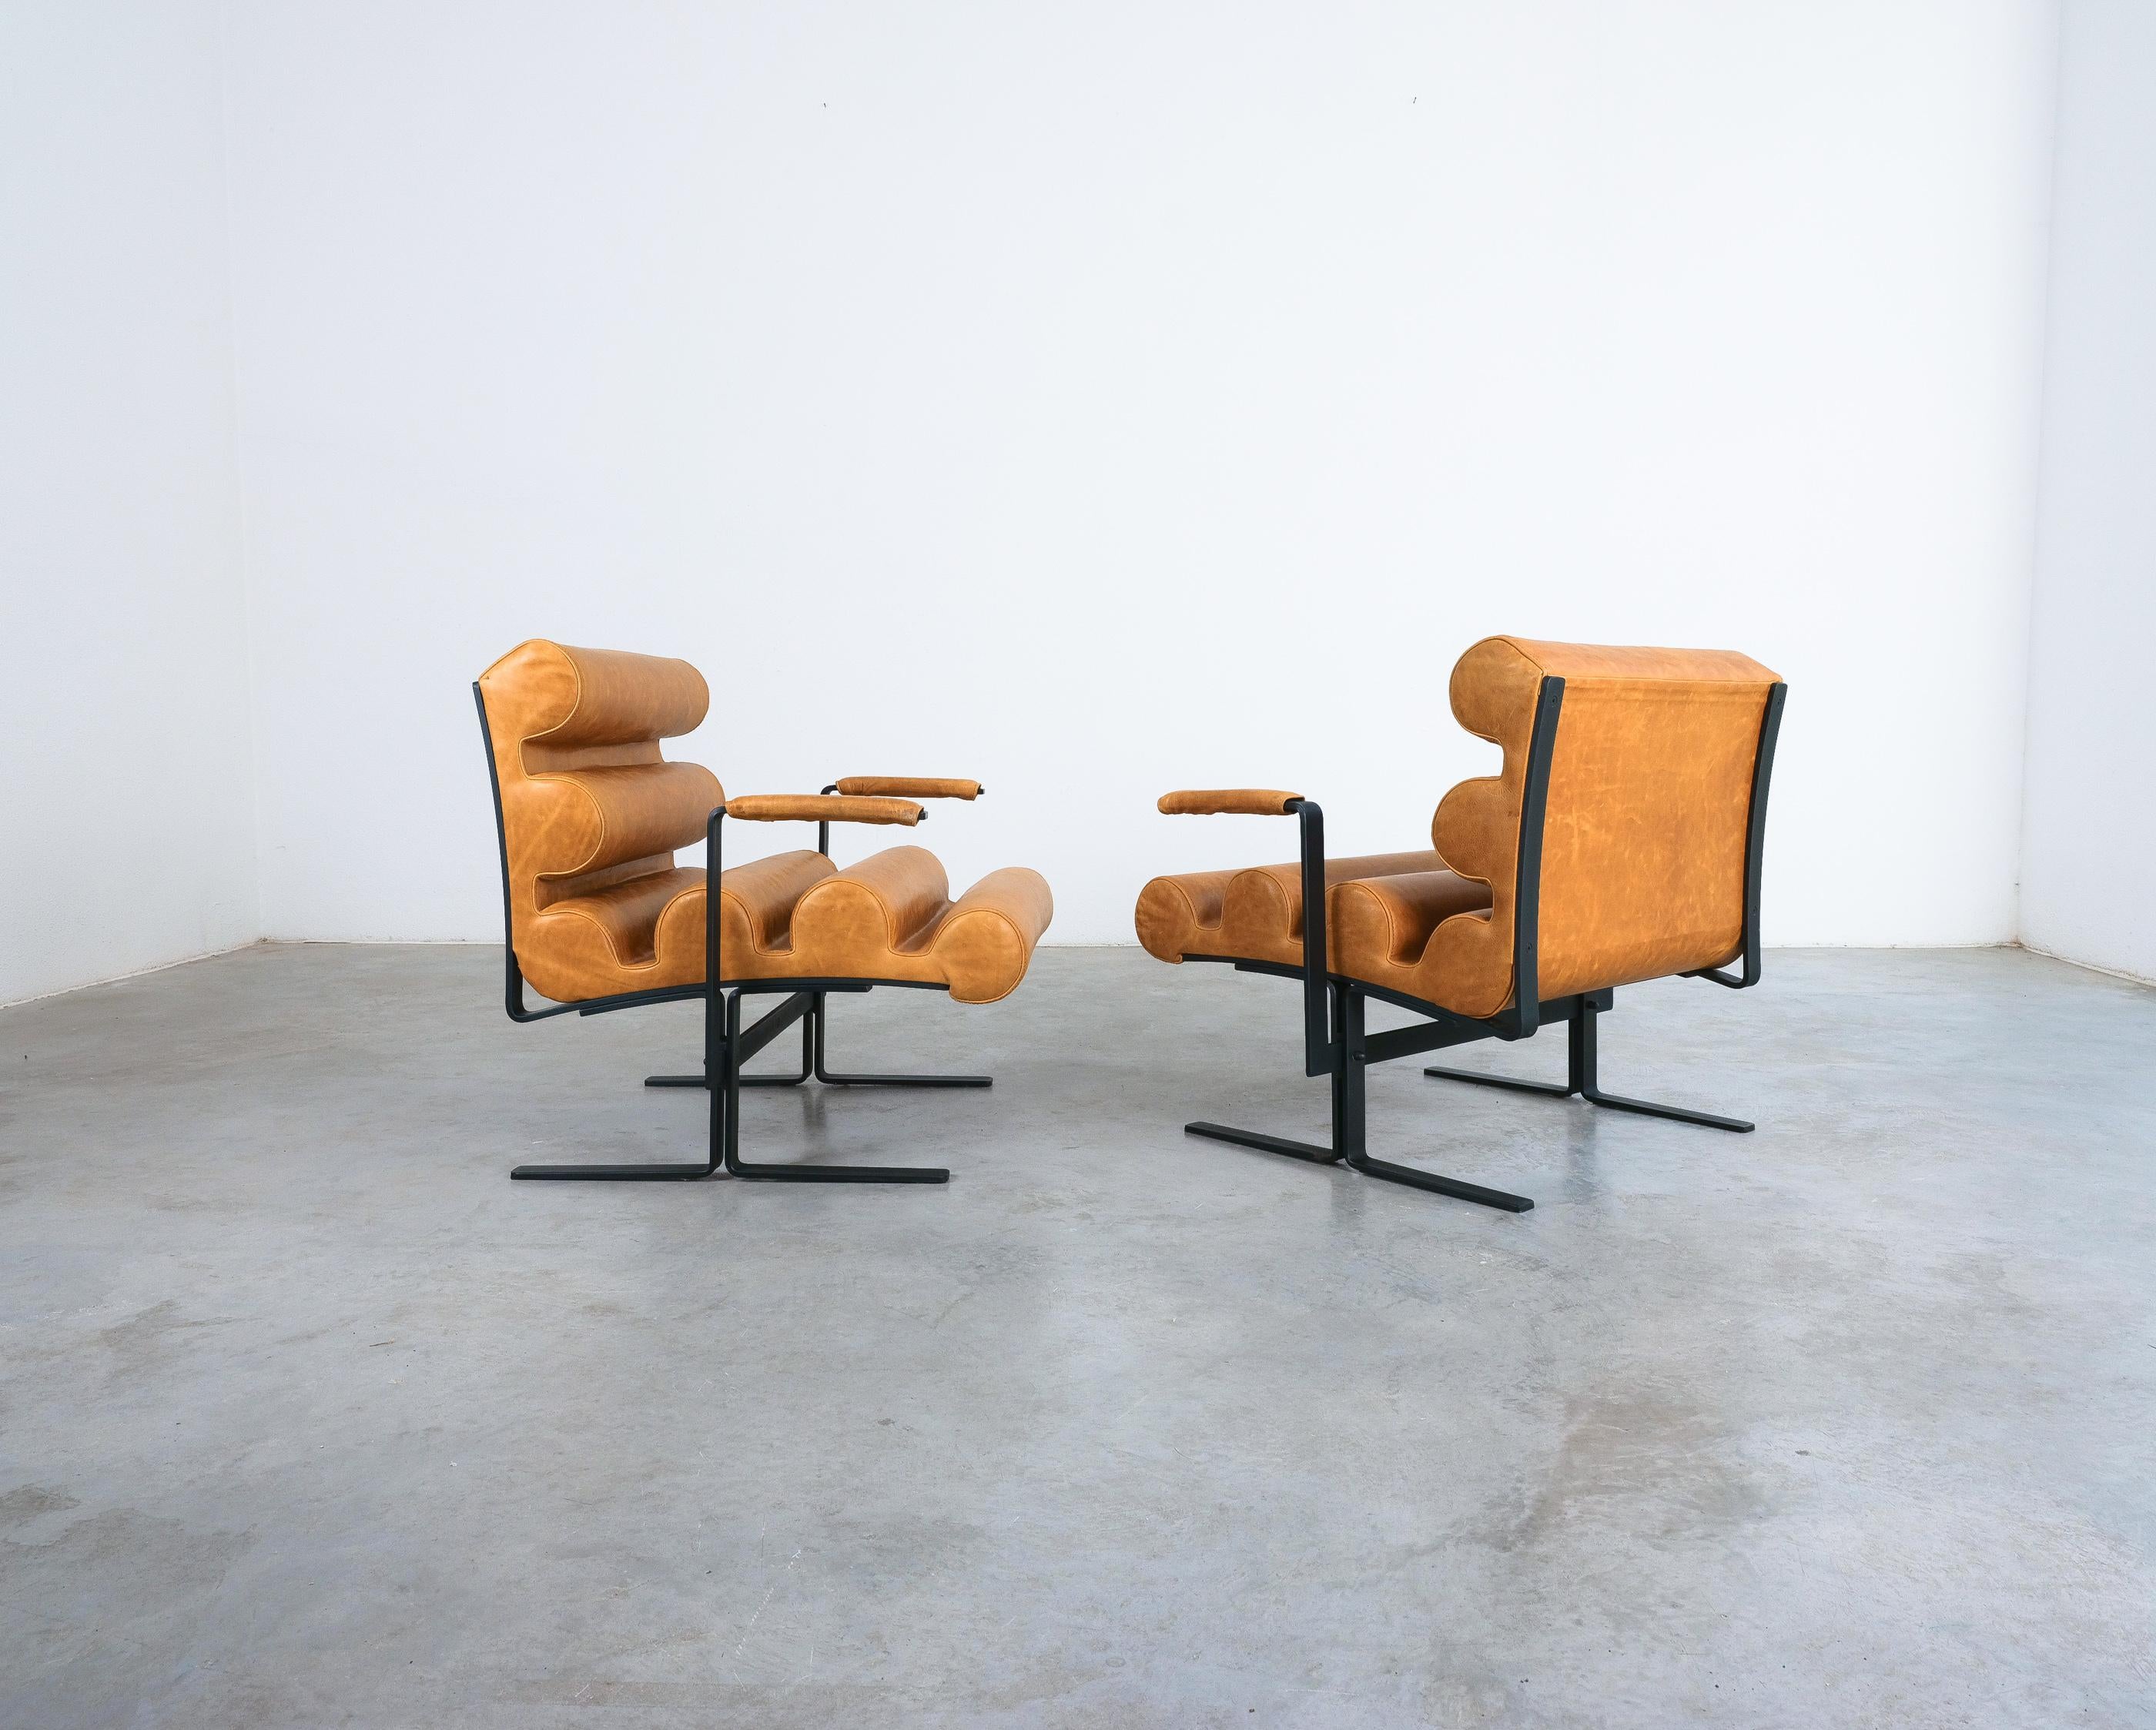 Italian Joe Colombo For Sormani Roll Brown Leather Spring Steel Armchair Pair (2) , 1962 For Sale